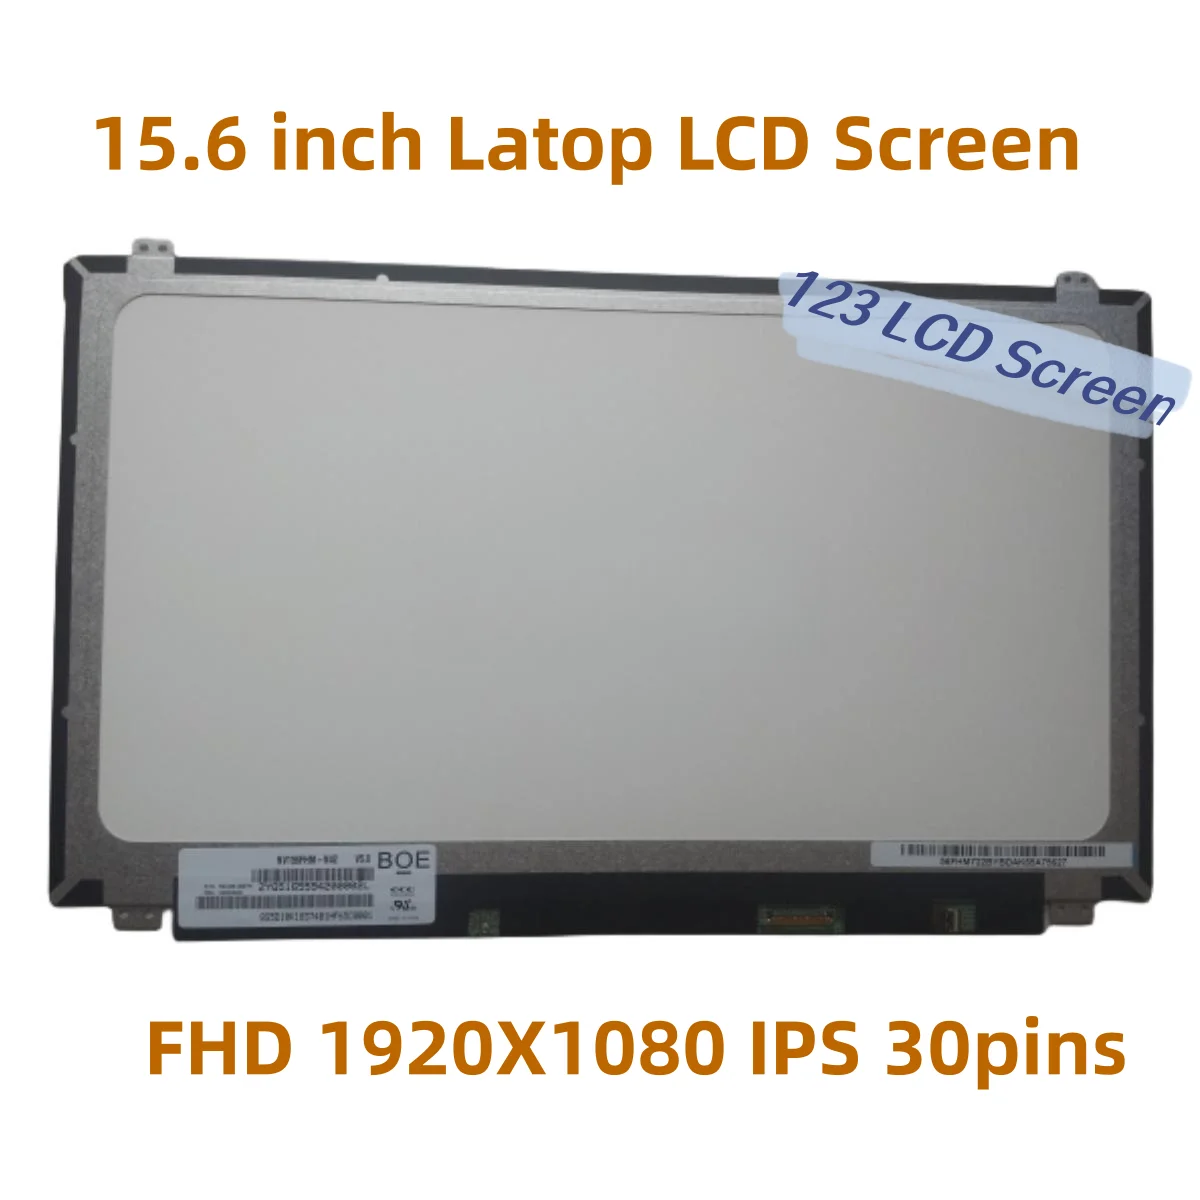 

Genuine For Asus TUF FX504G Laptop LCD Screen 15.6" IPS FHD 1920*1080 Display Replacement New 30 Pins Panel Matrix matte